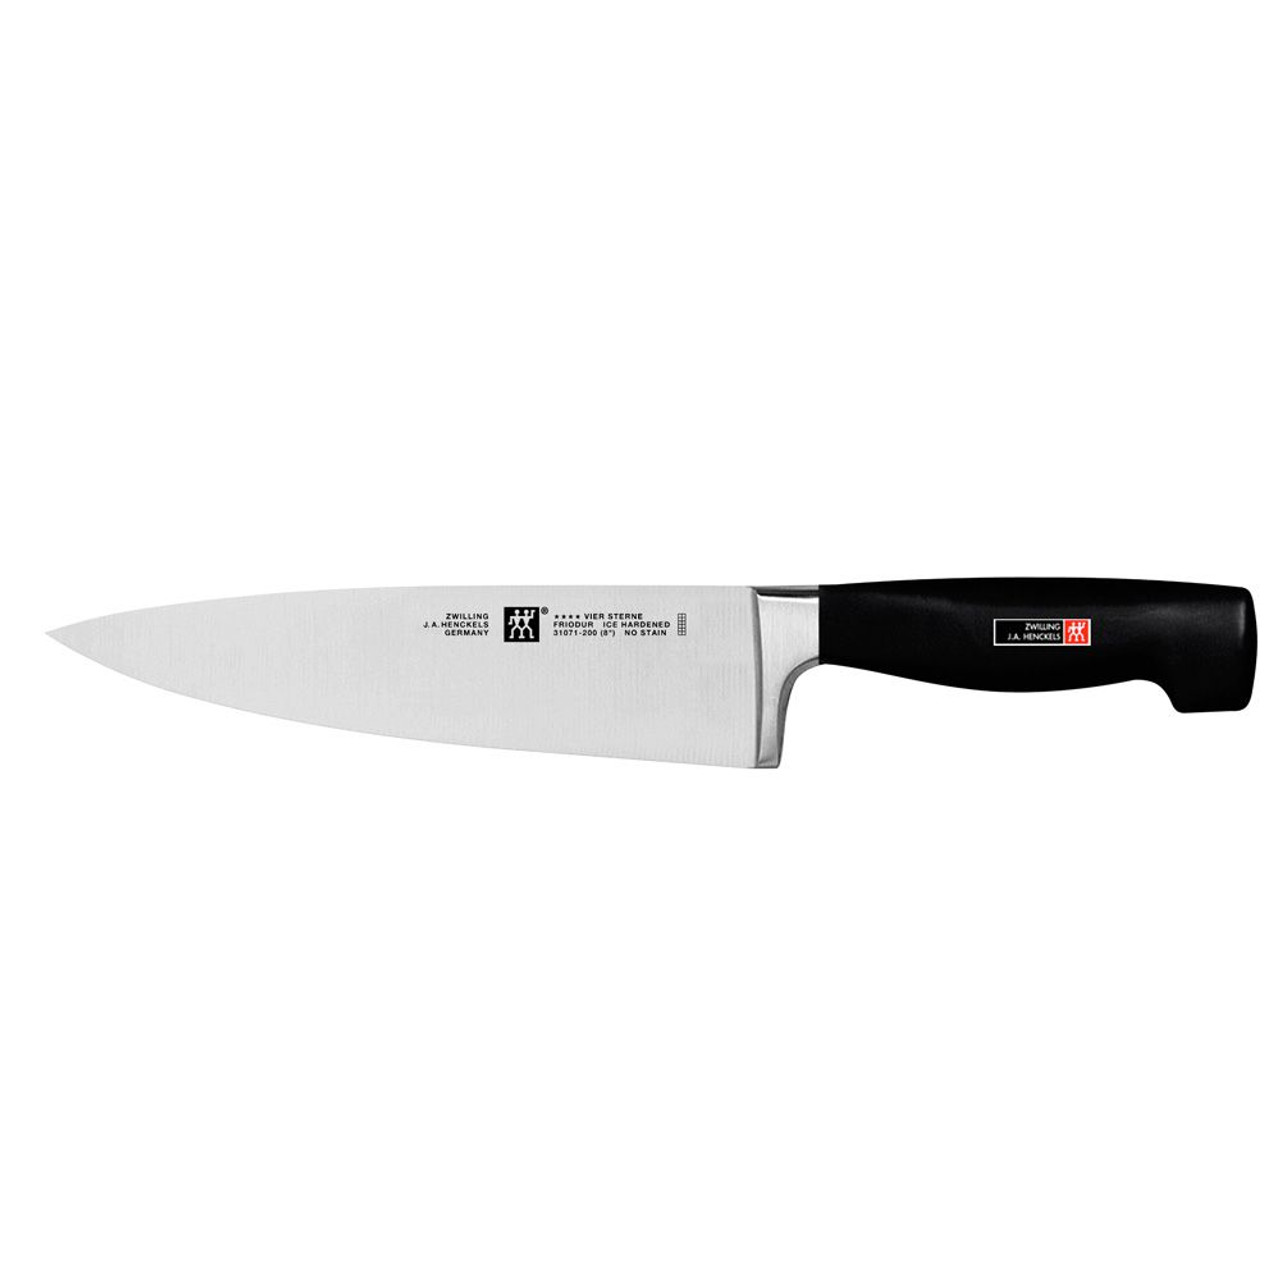 Zwilling J.A. Henckels Four Star Cook's Knife